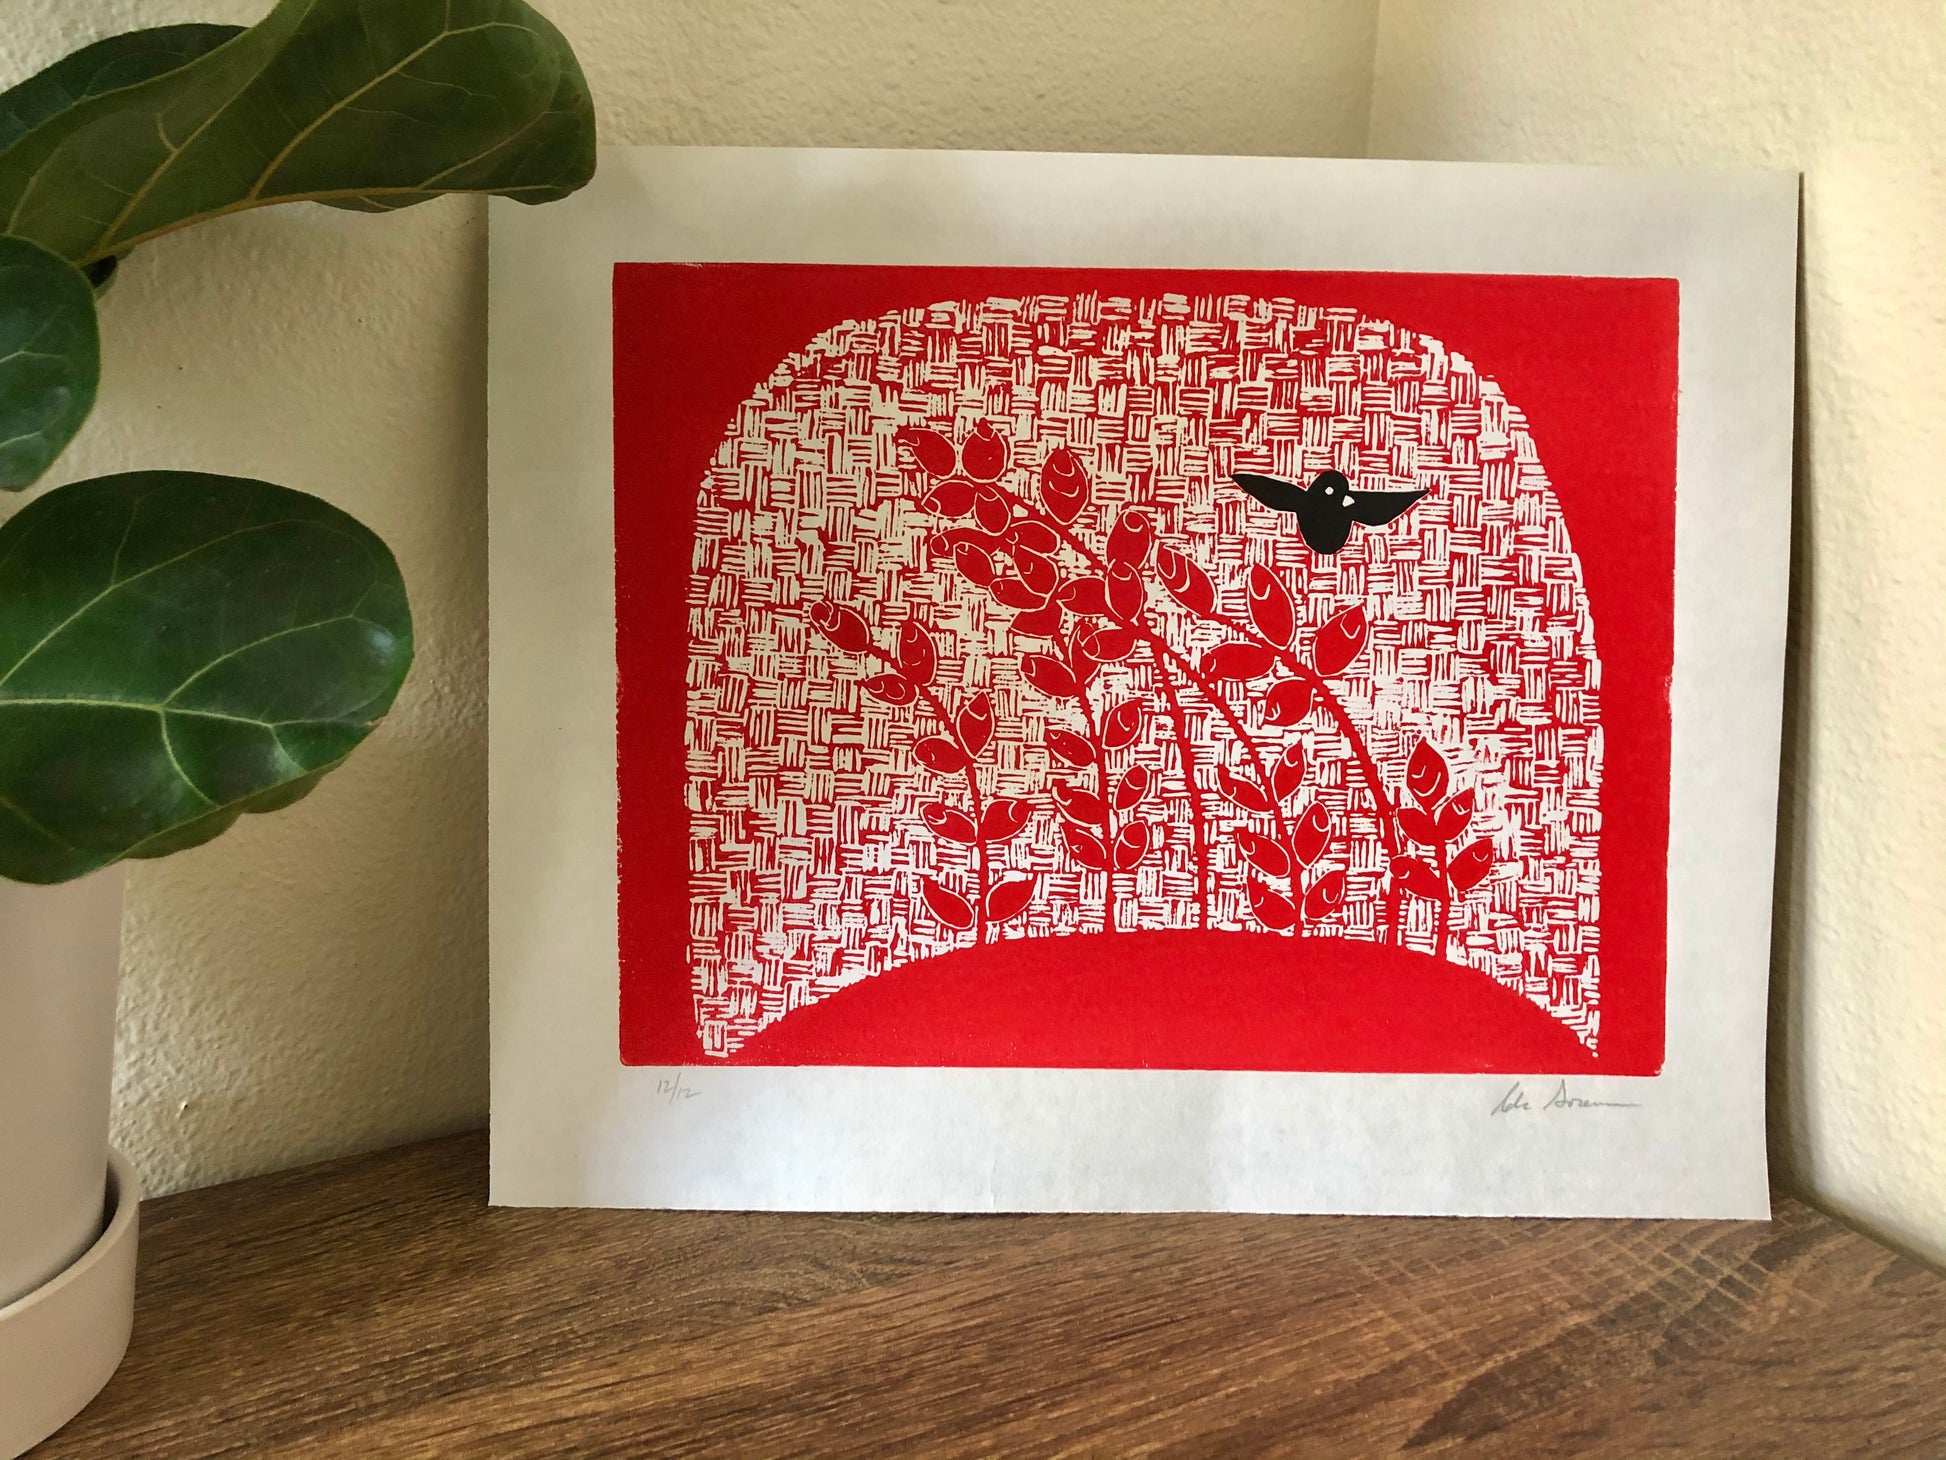 Cheerful red nature print with black bird in flight.